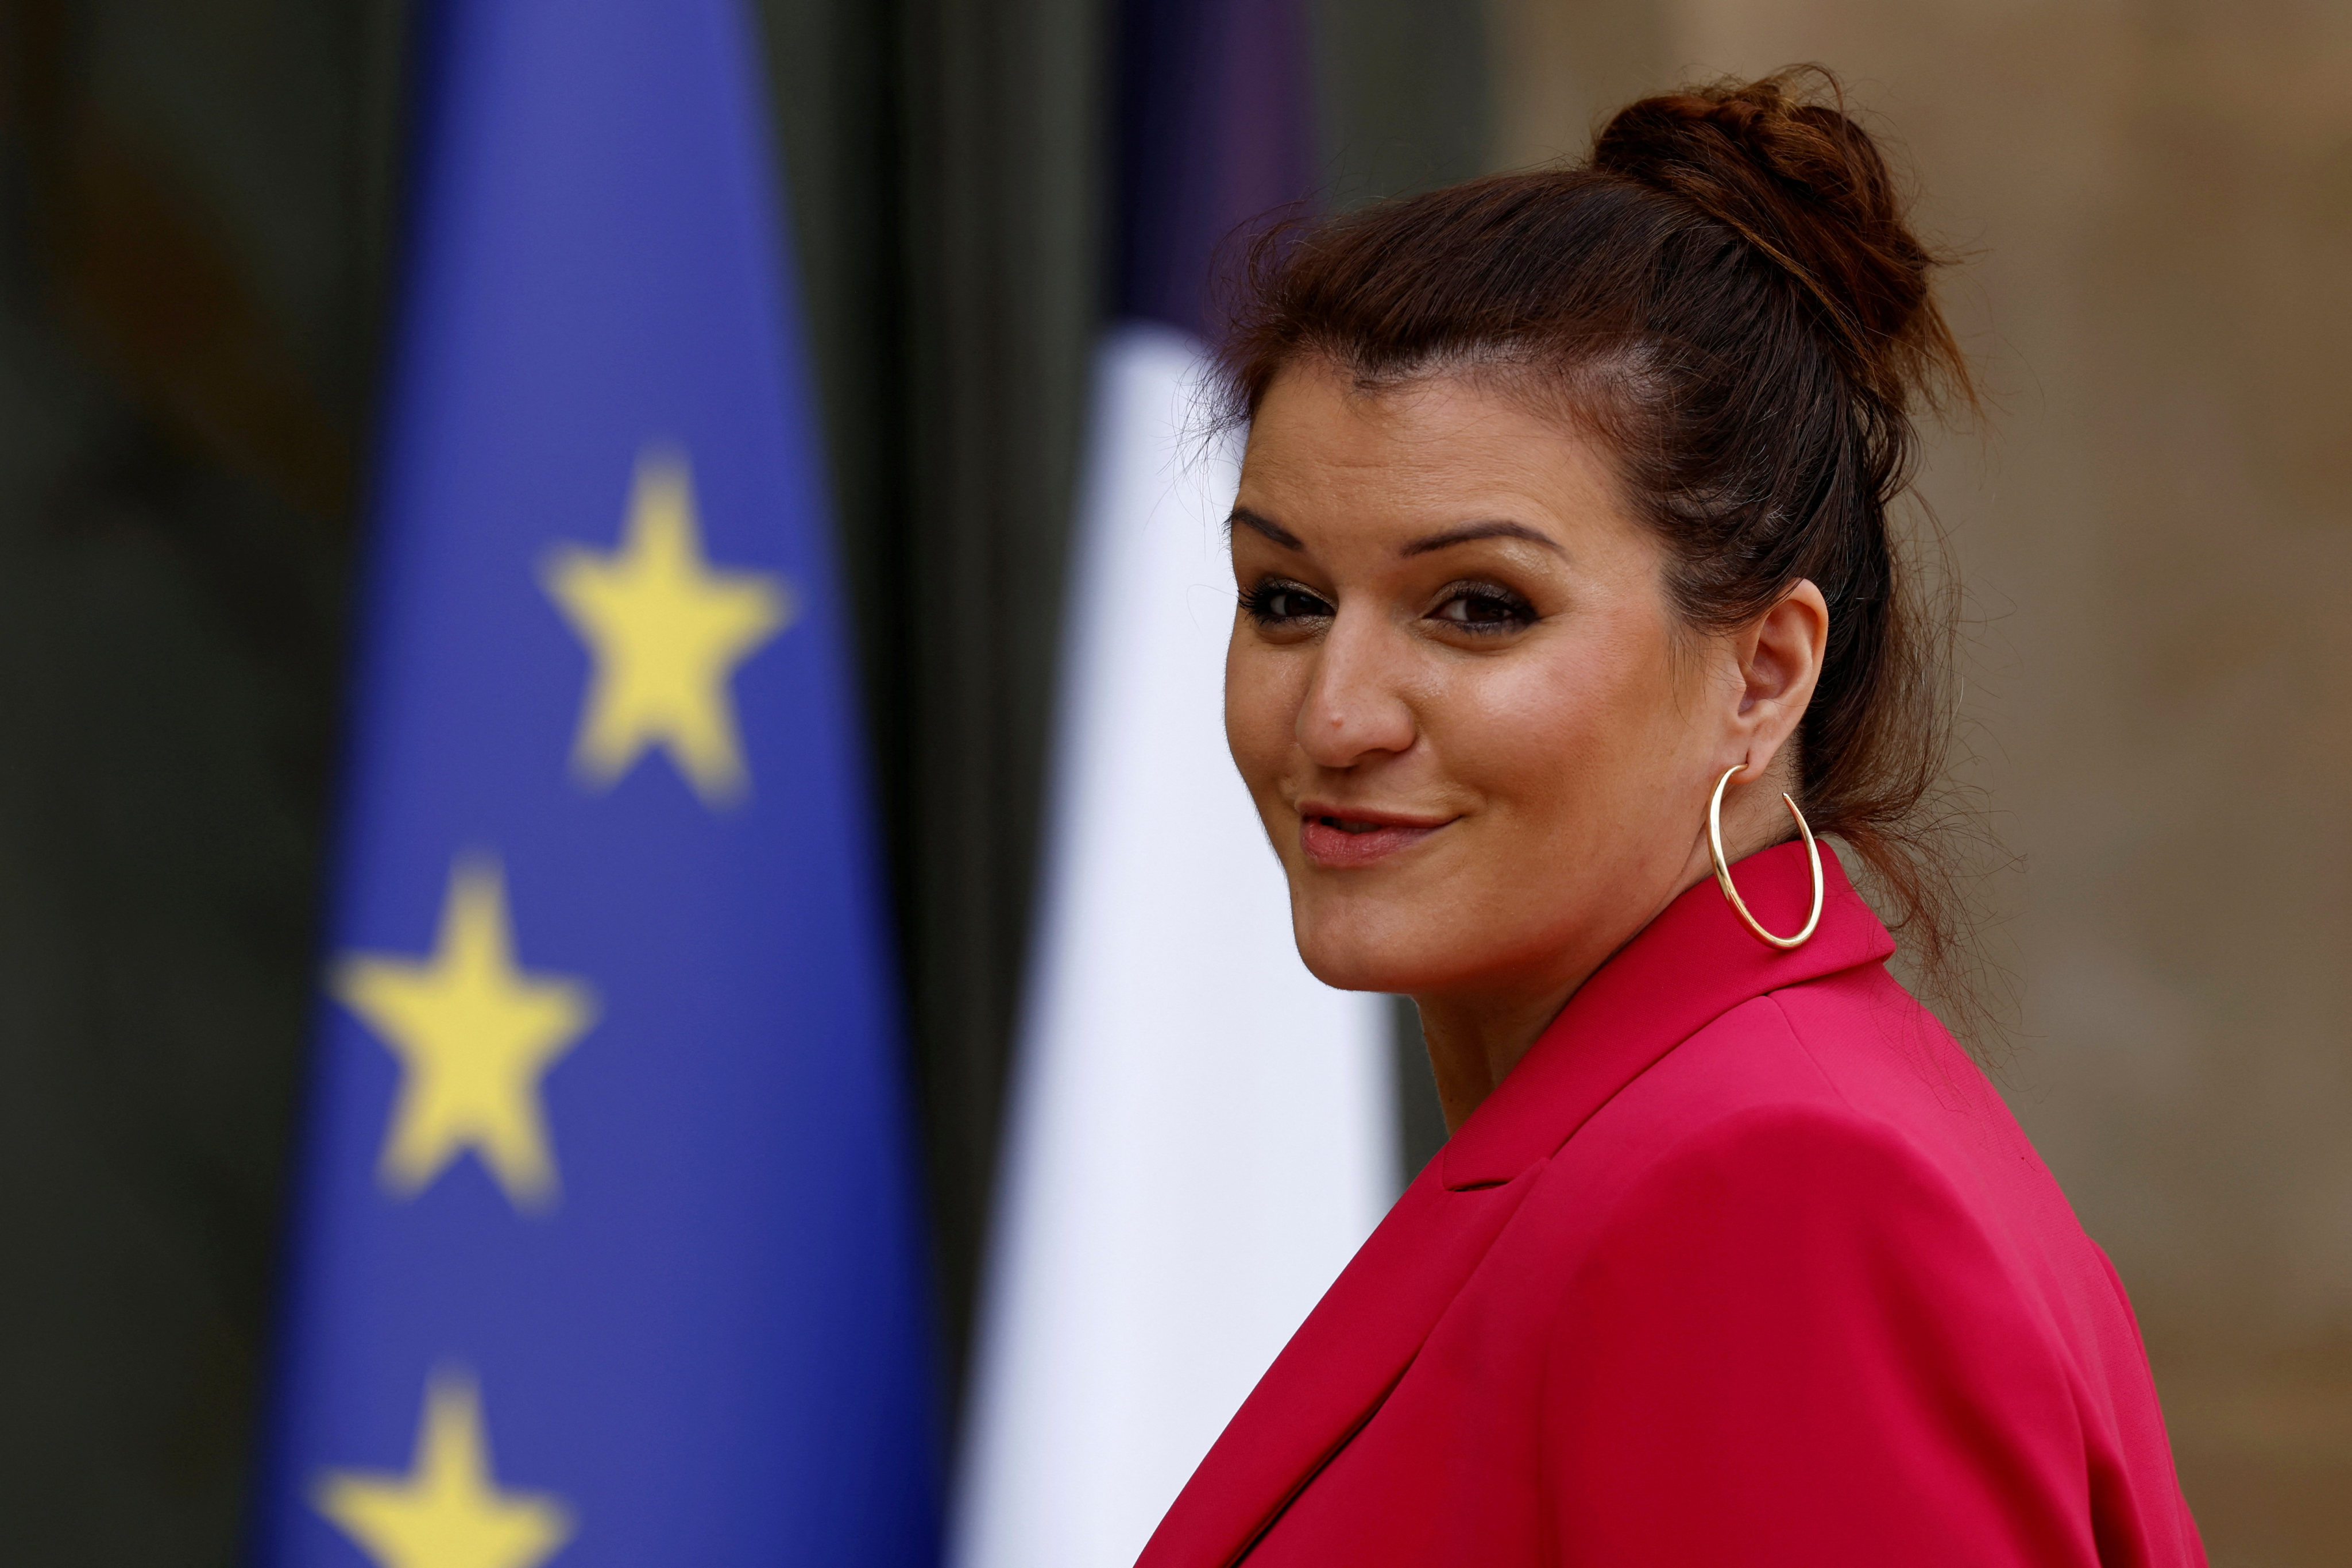 French social economy and associations minister Marlene Schiappa. Photo: Reuters